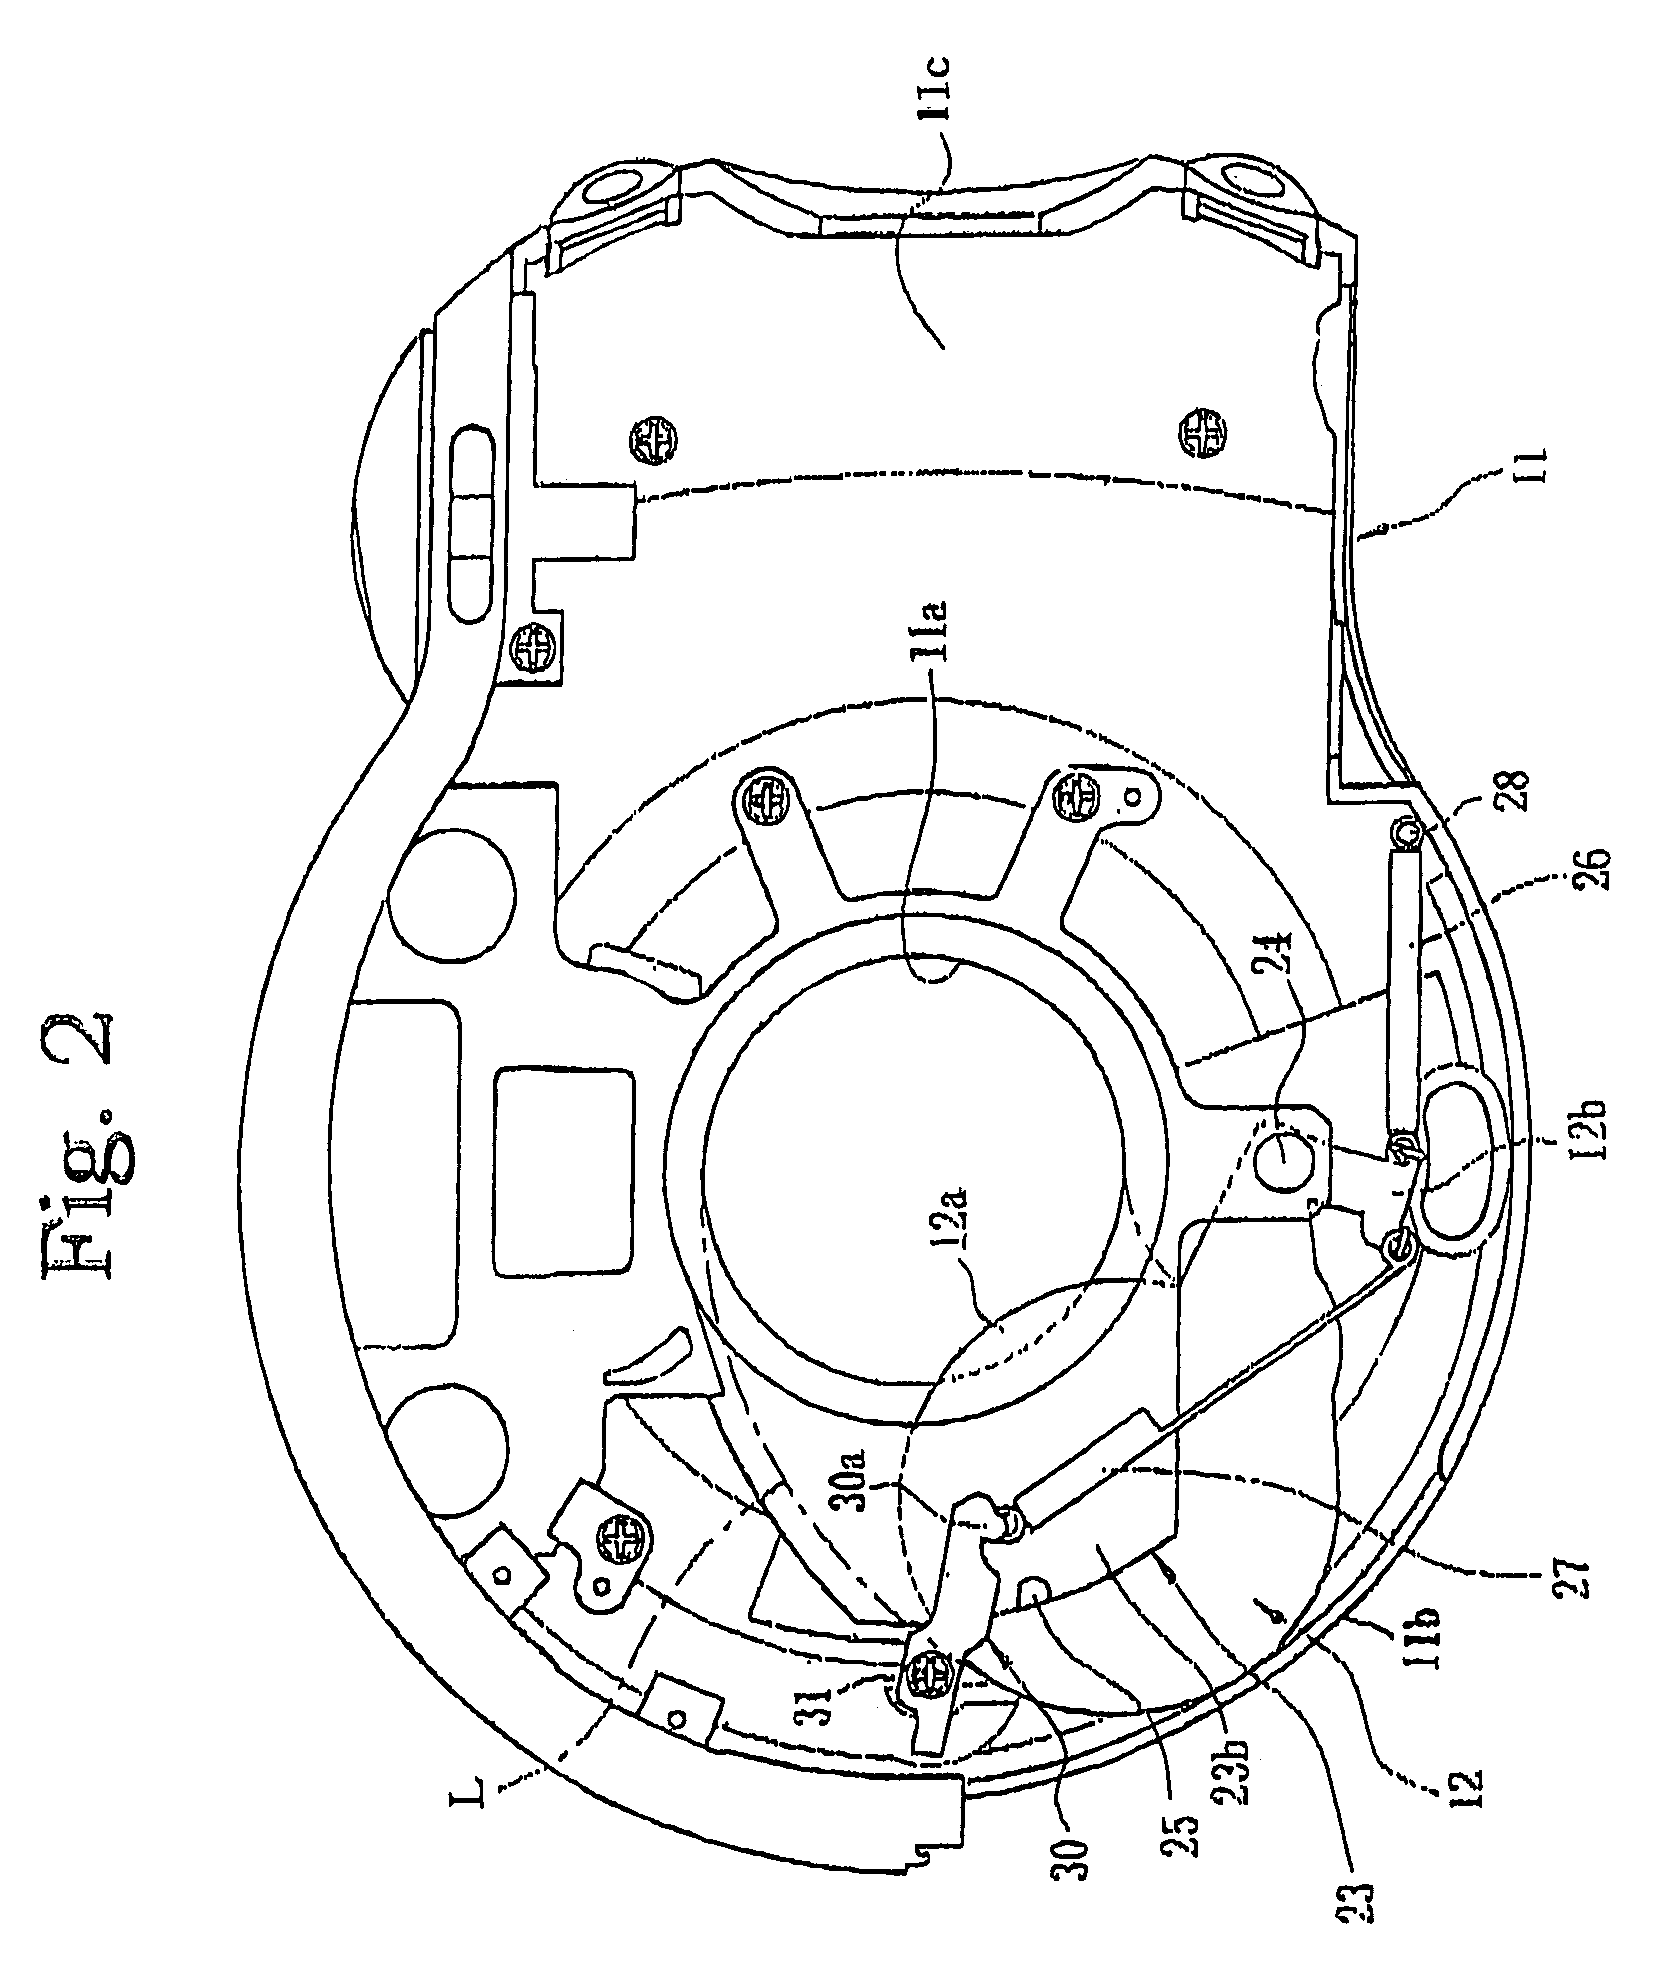 Lens-barrier device for camera